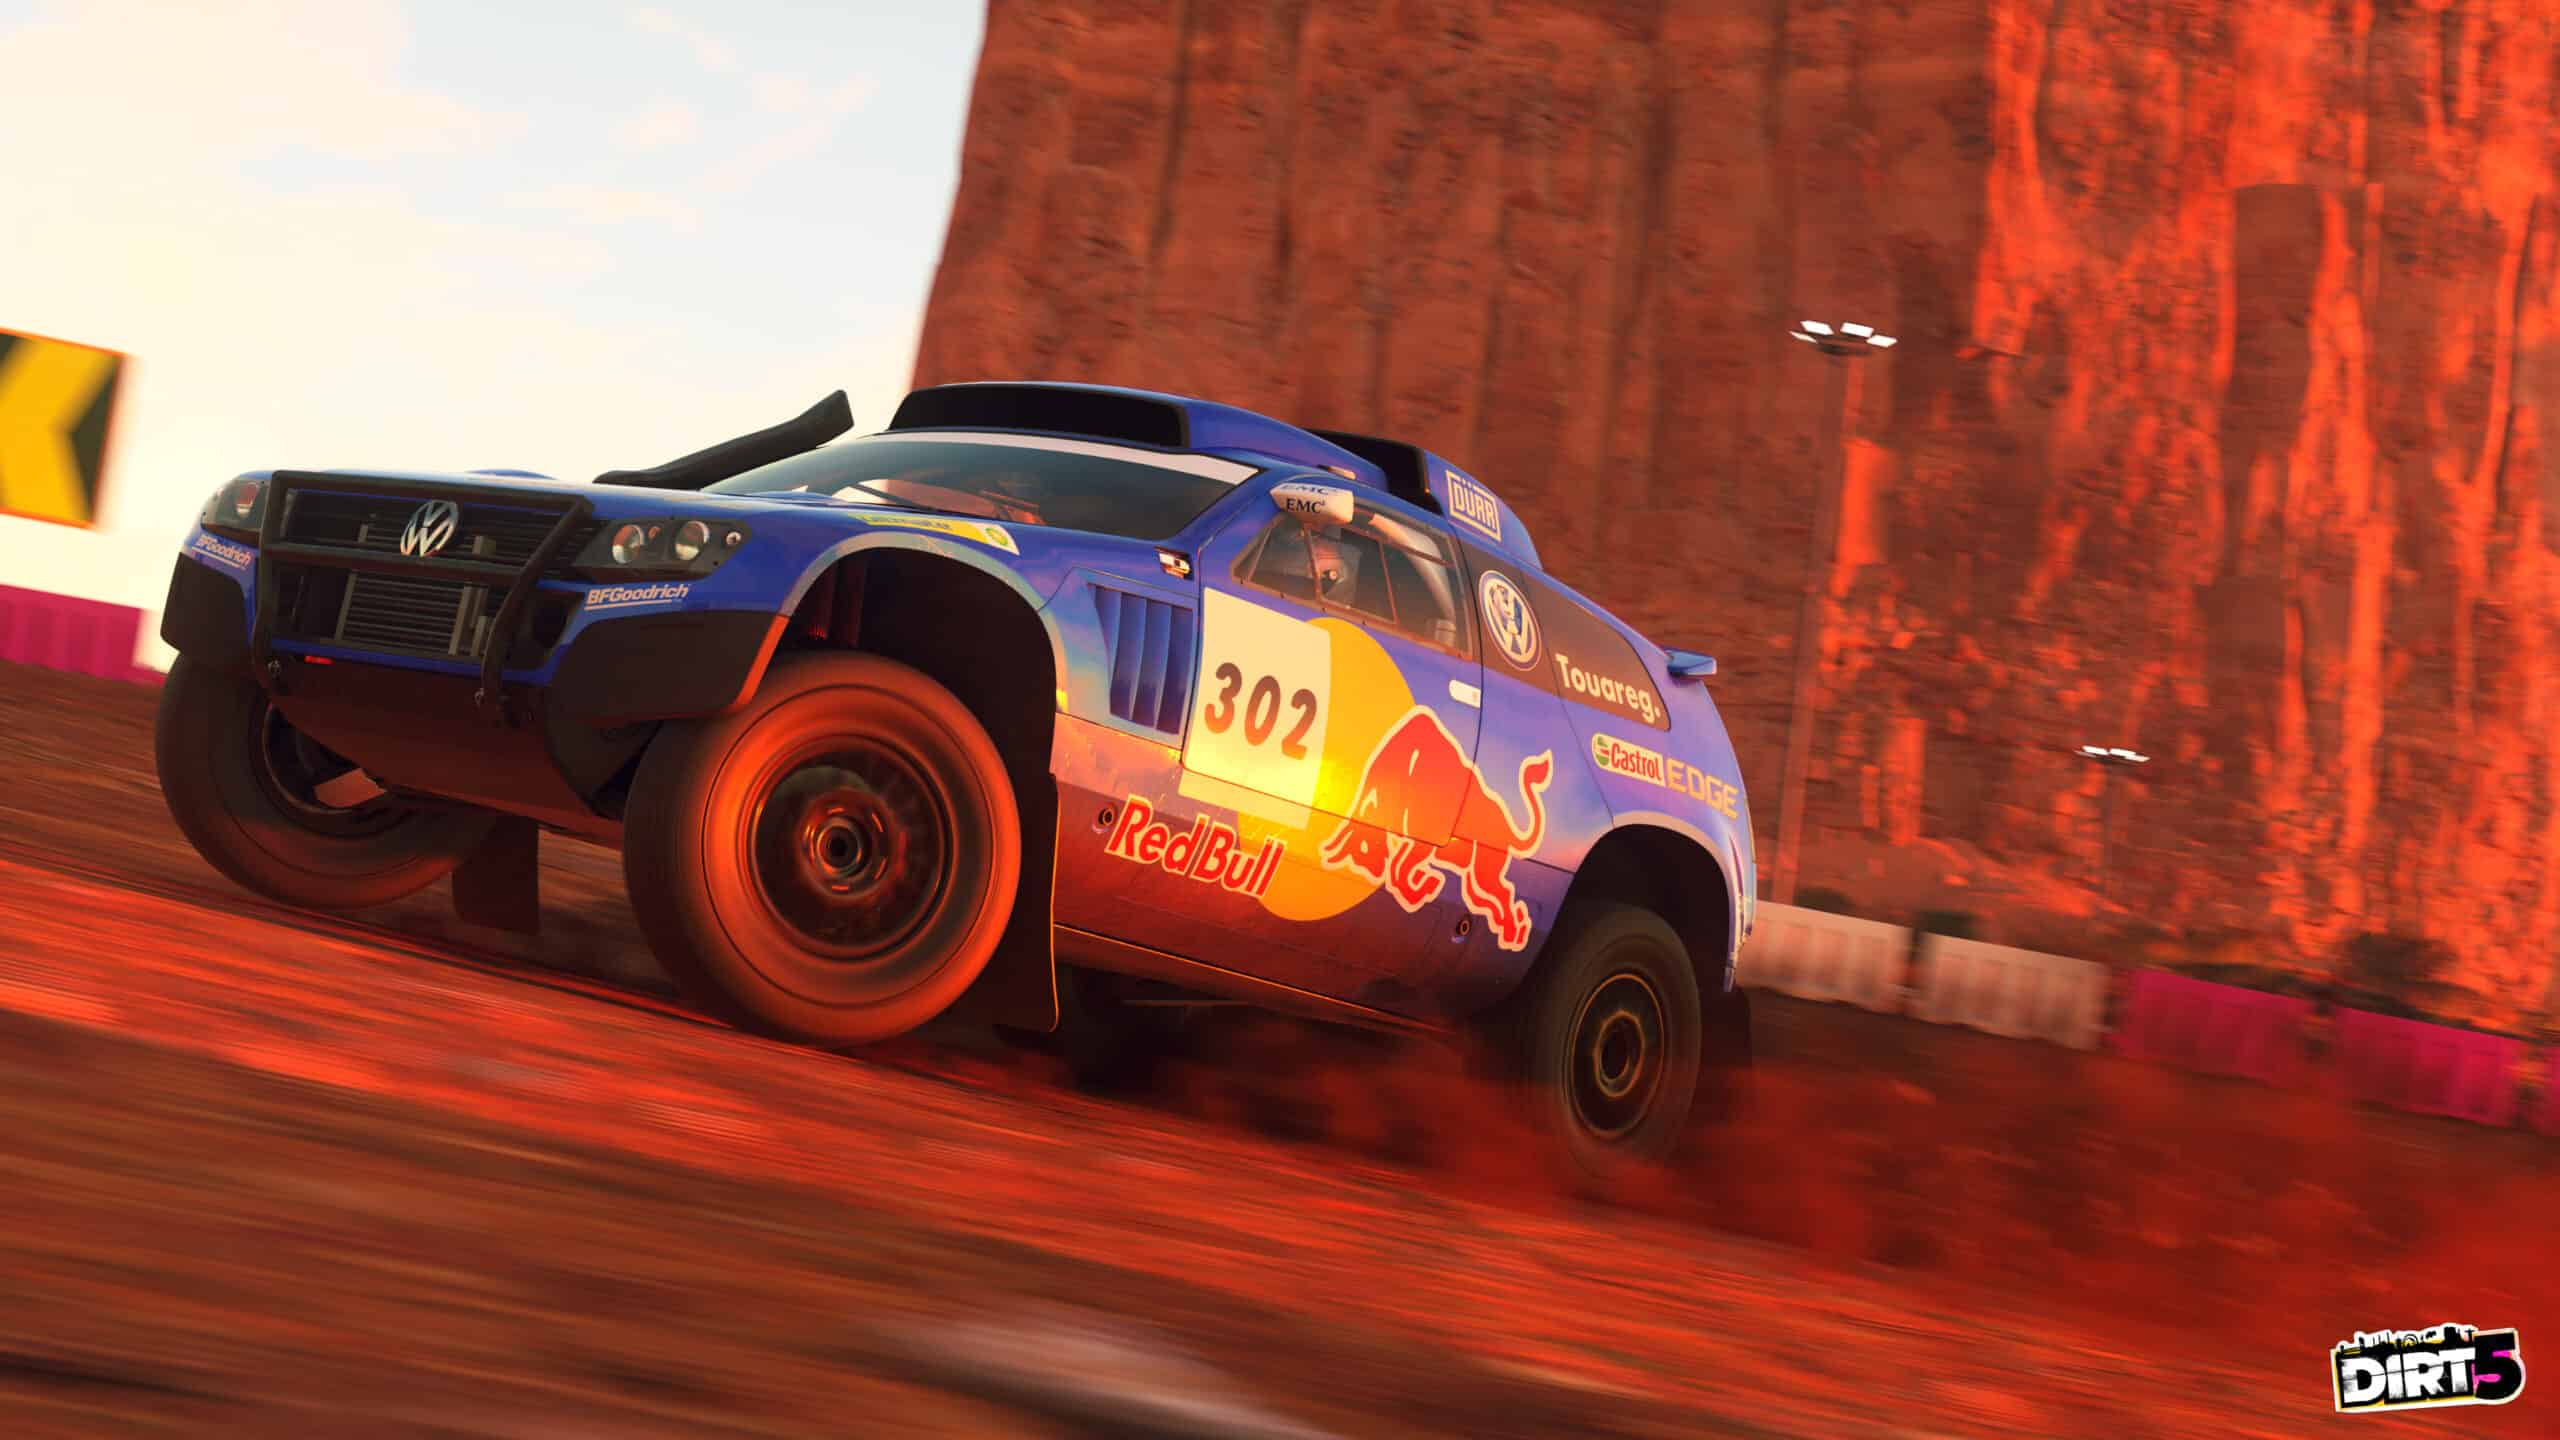 Latest DIRT 5 update features online cross-play and Red Bull liveries